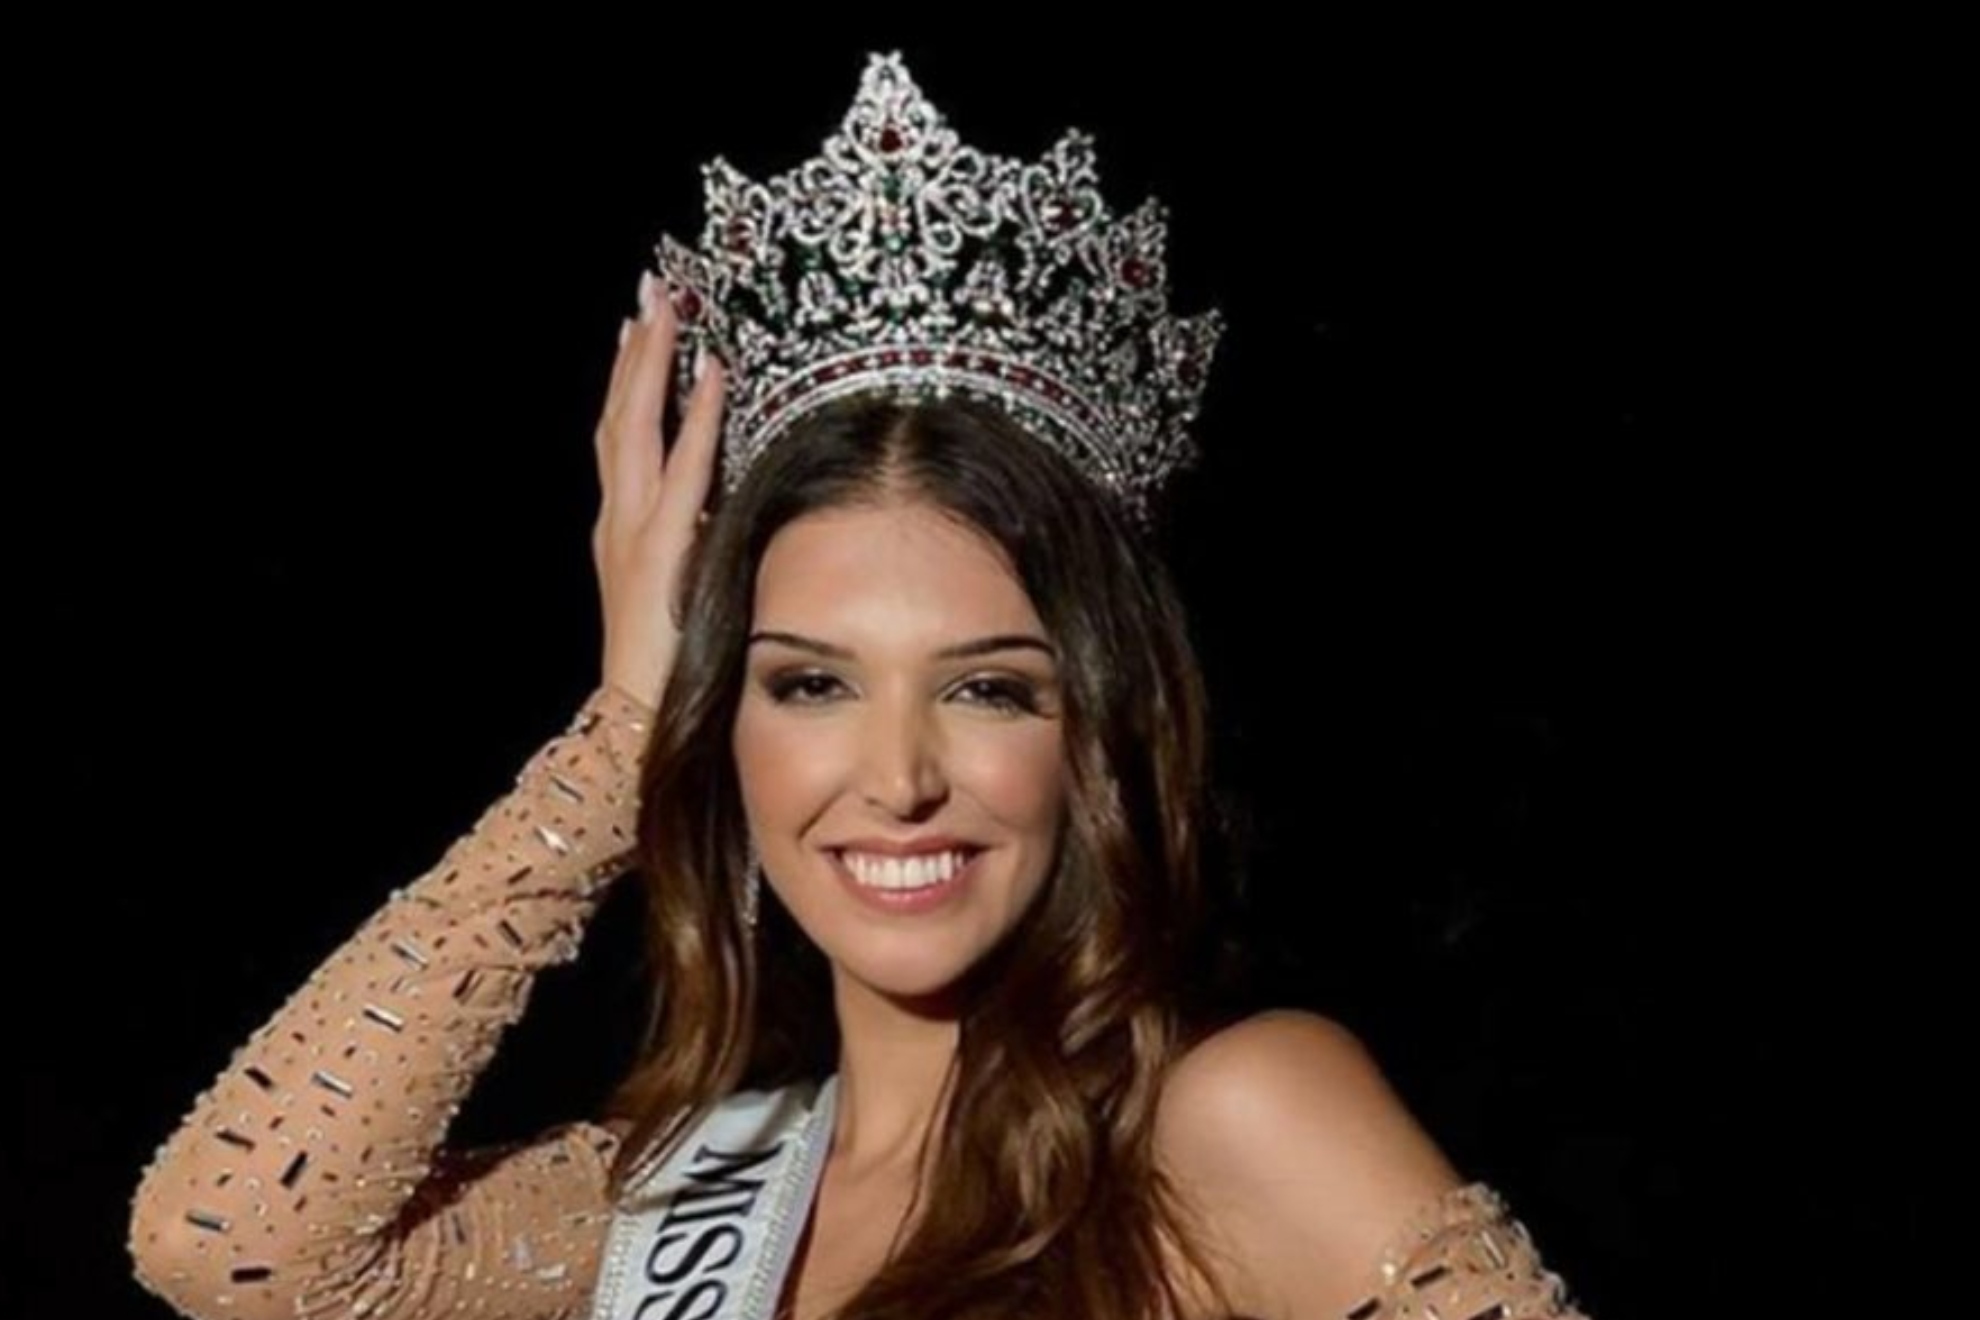 Miss Portugal and Miss Netherlands, trans women, will fight to win Miss